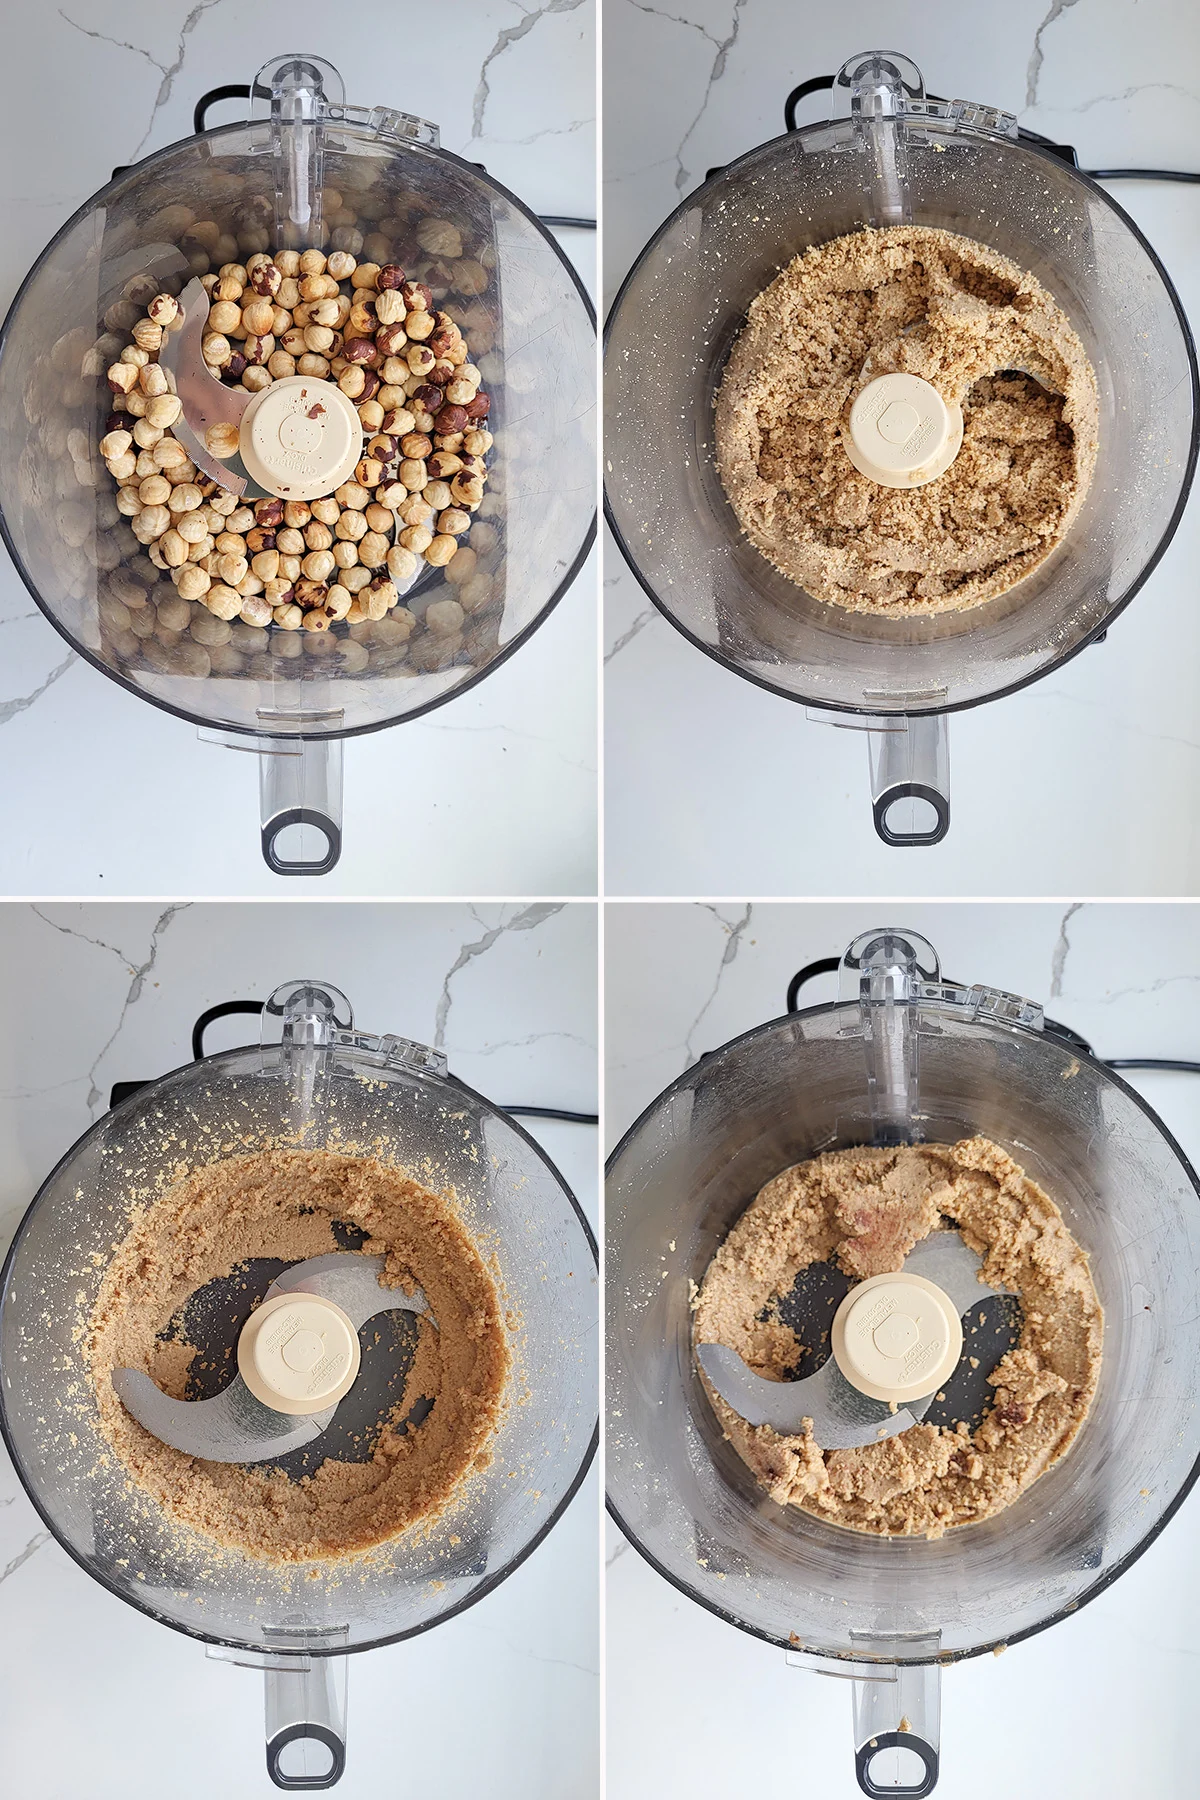 nuts being ground in a food processor.